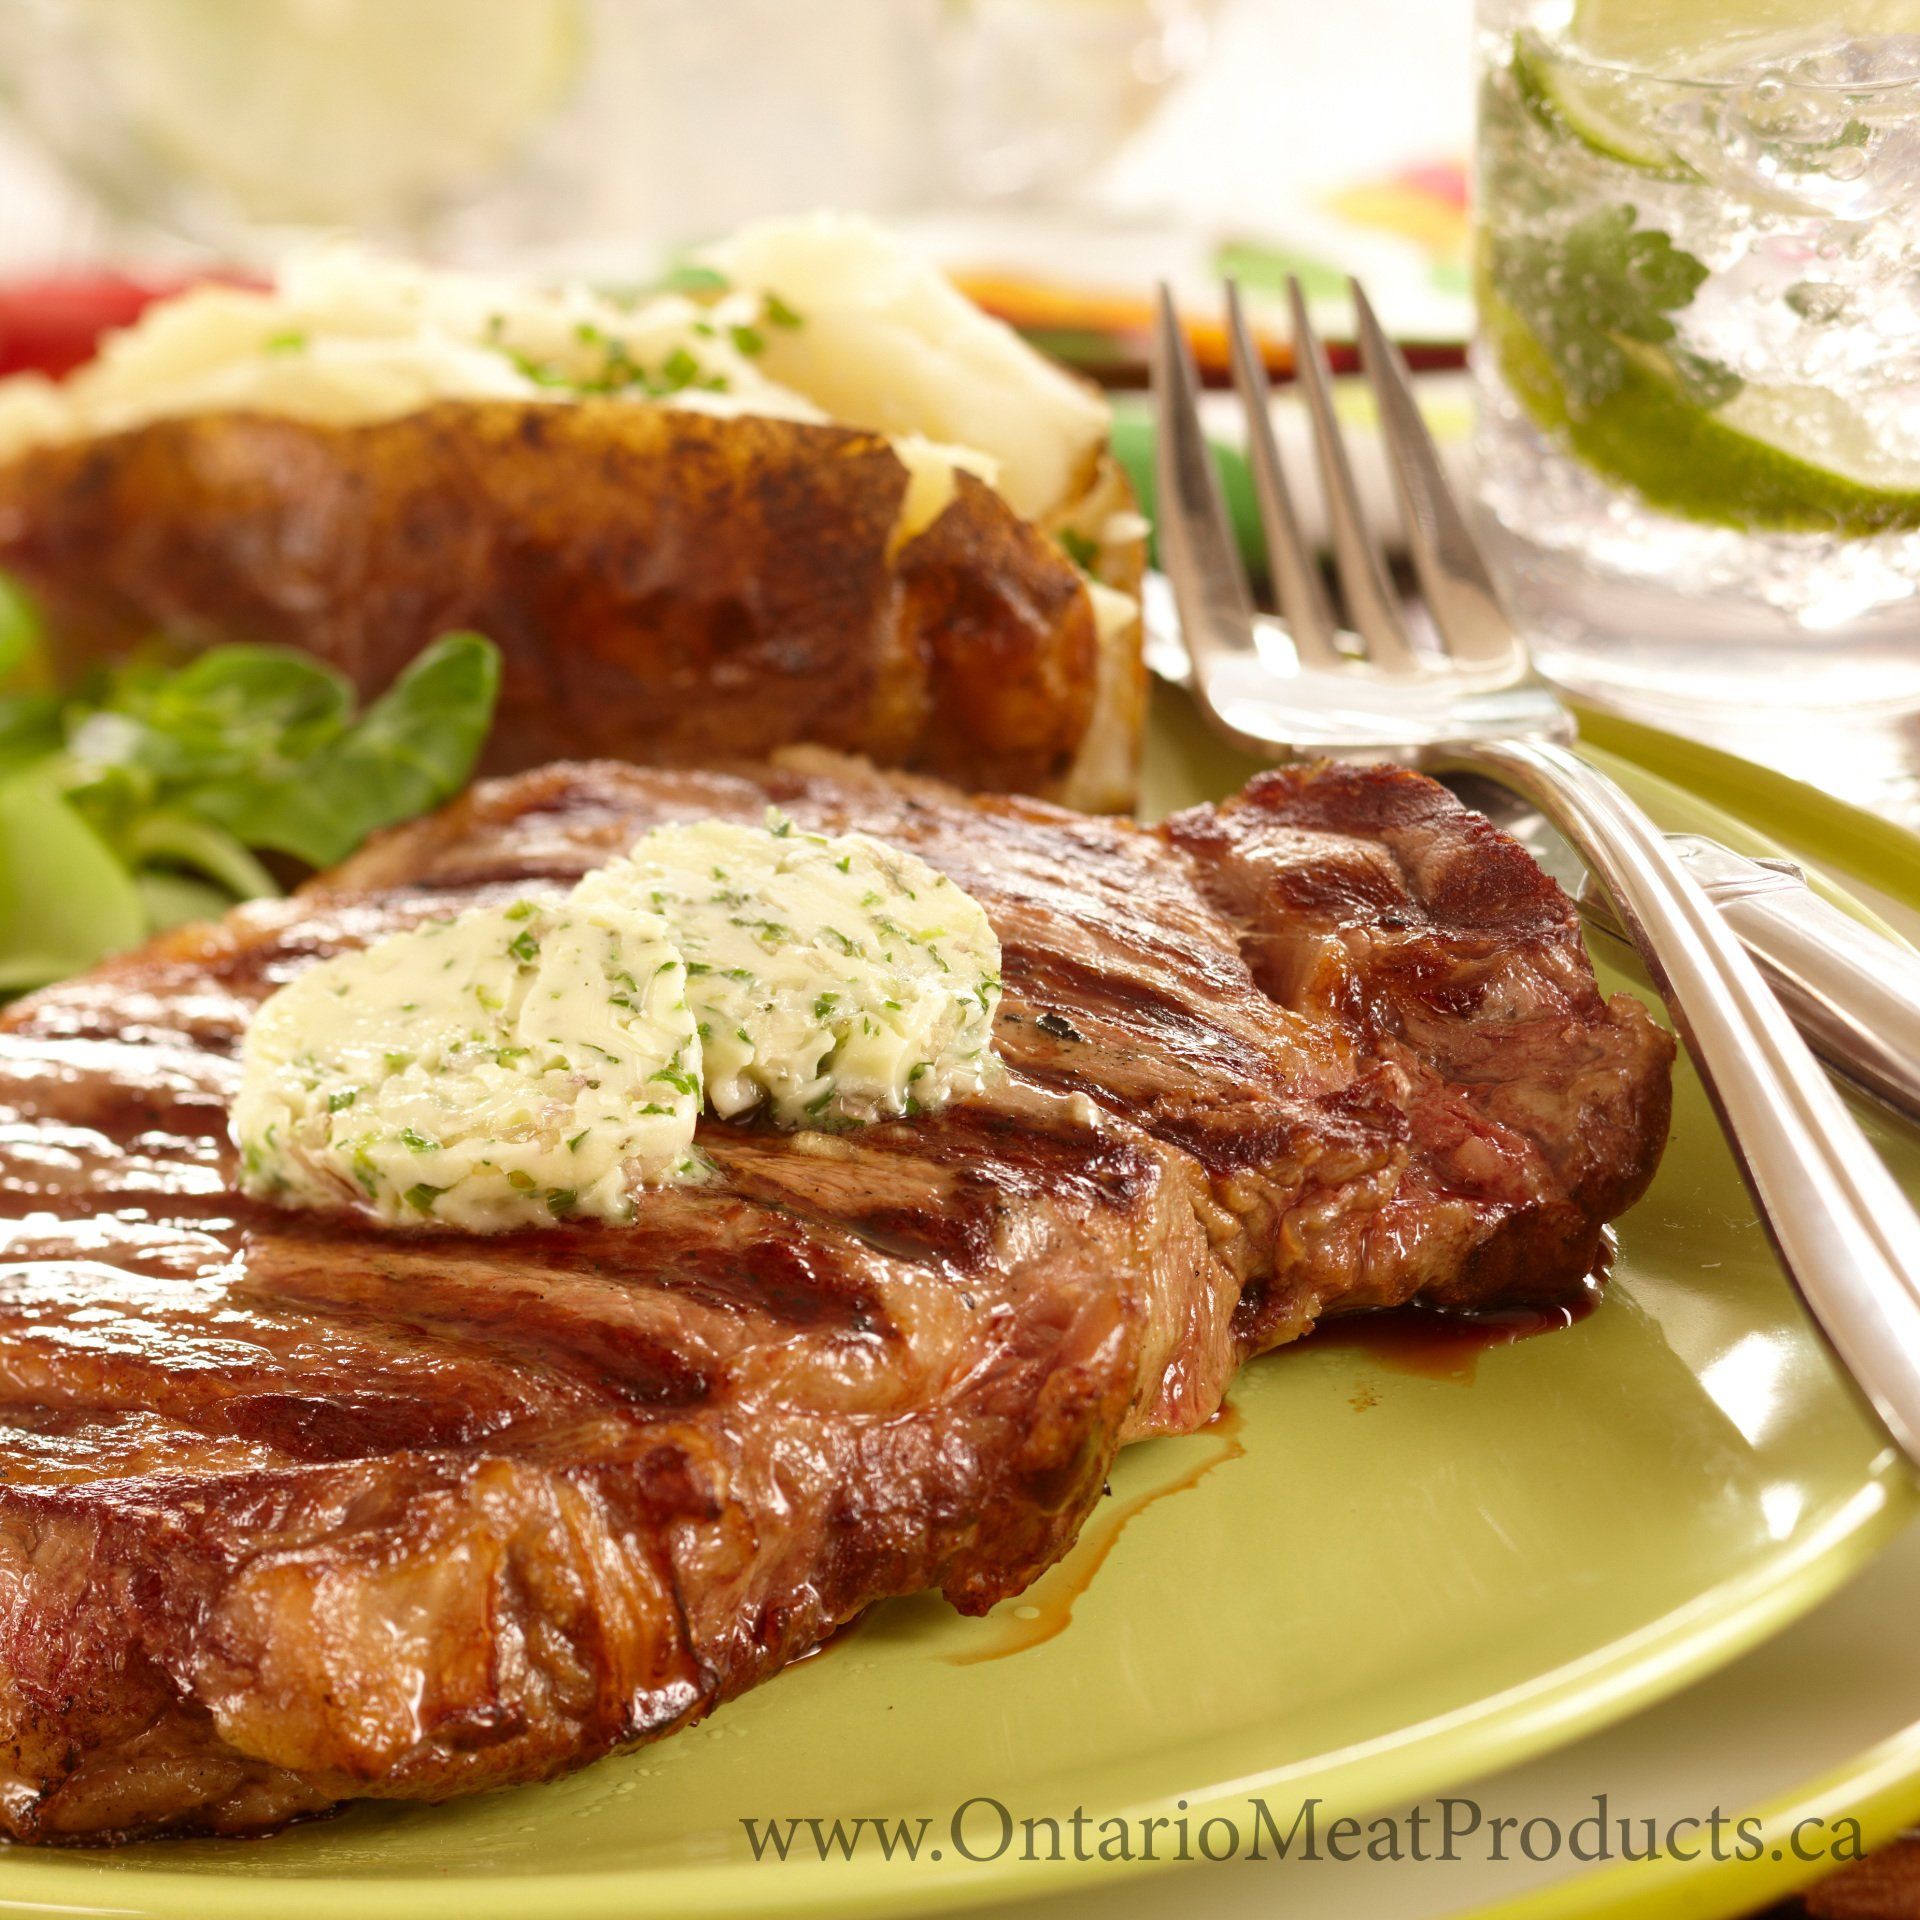 Grilled Steak with Shallot Herb Butter